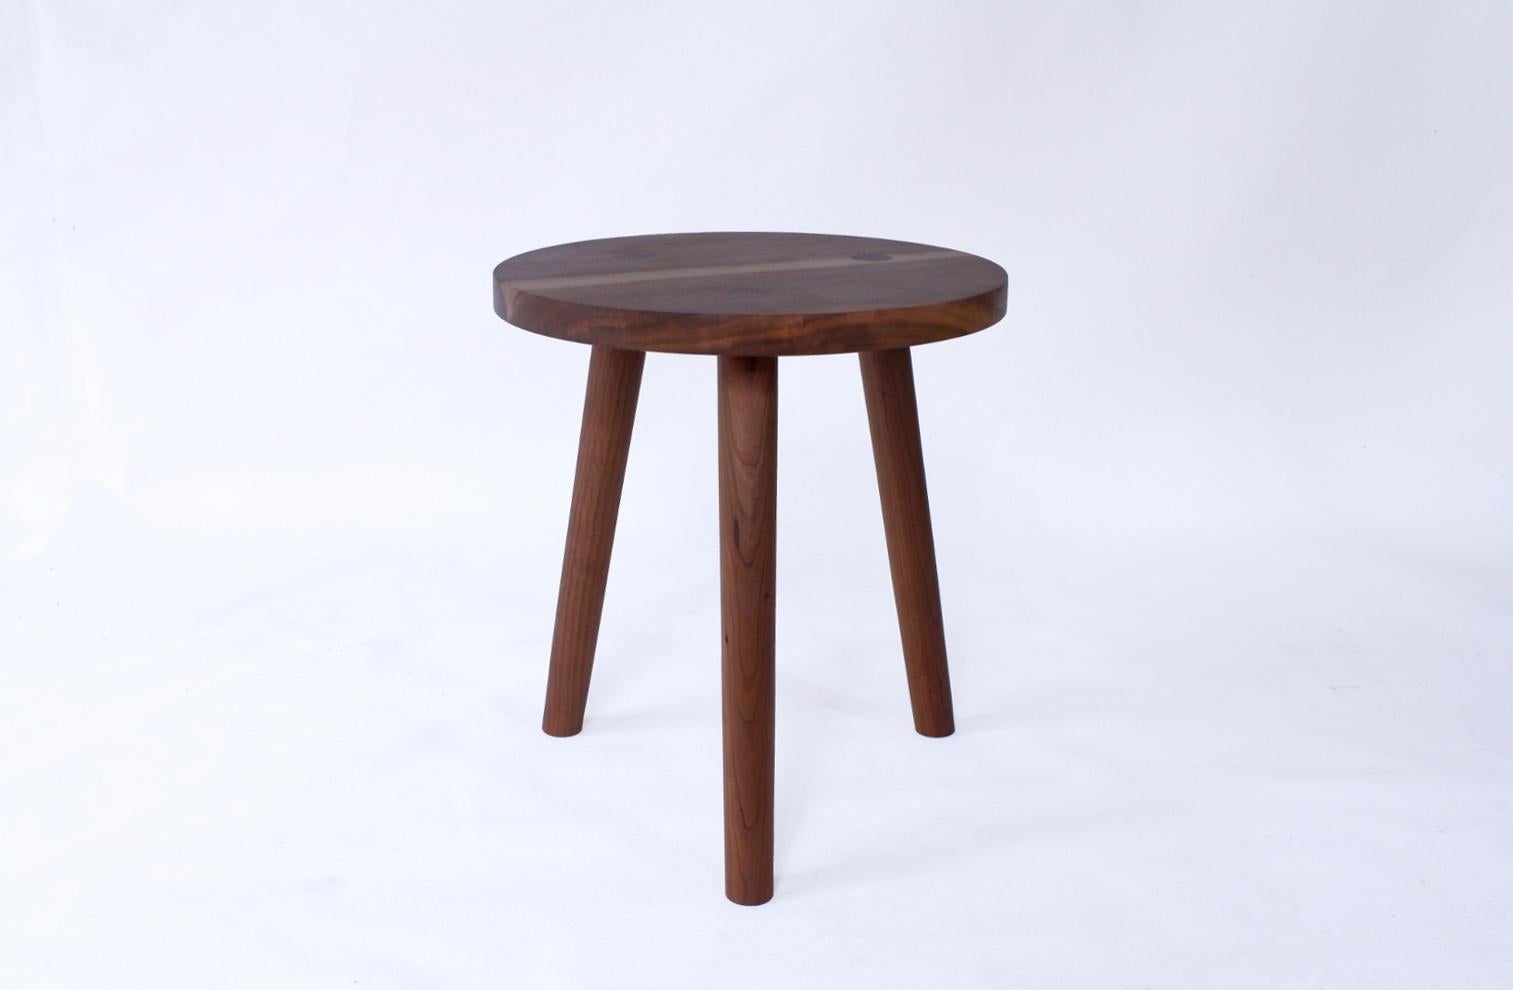 Bare a Handmade Wood Table by Laylo Studio For Sale 3